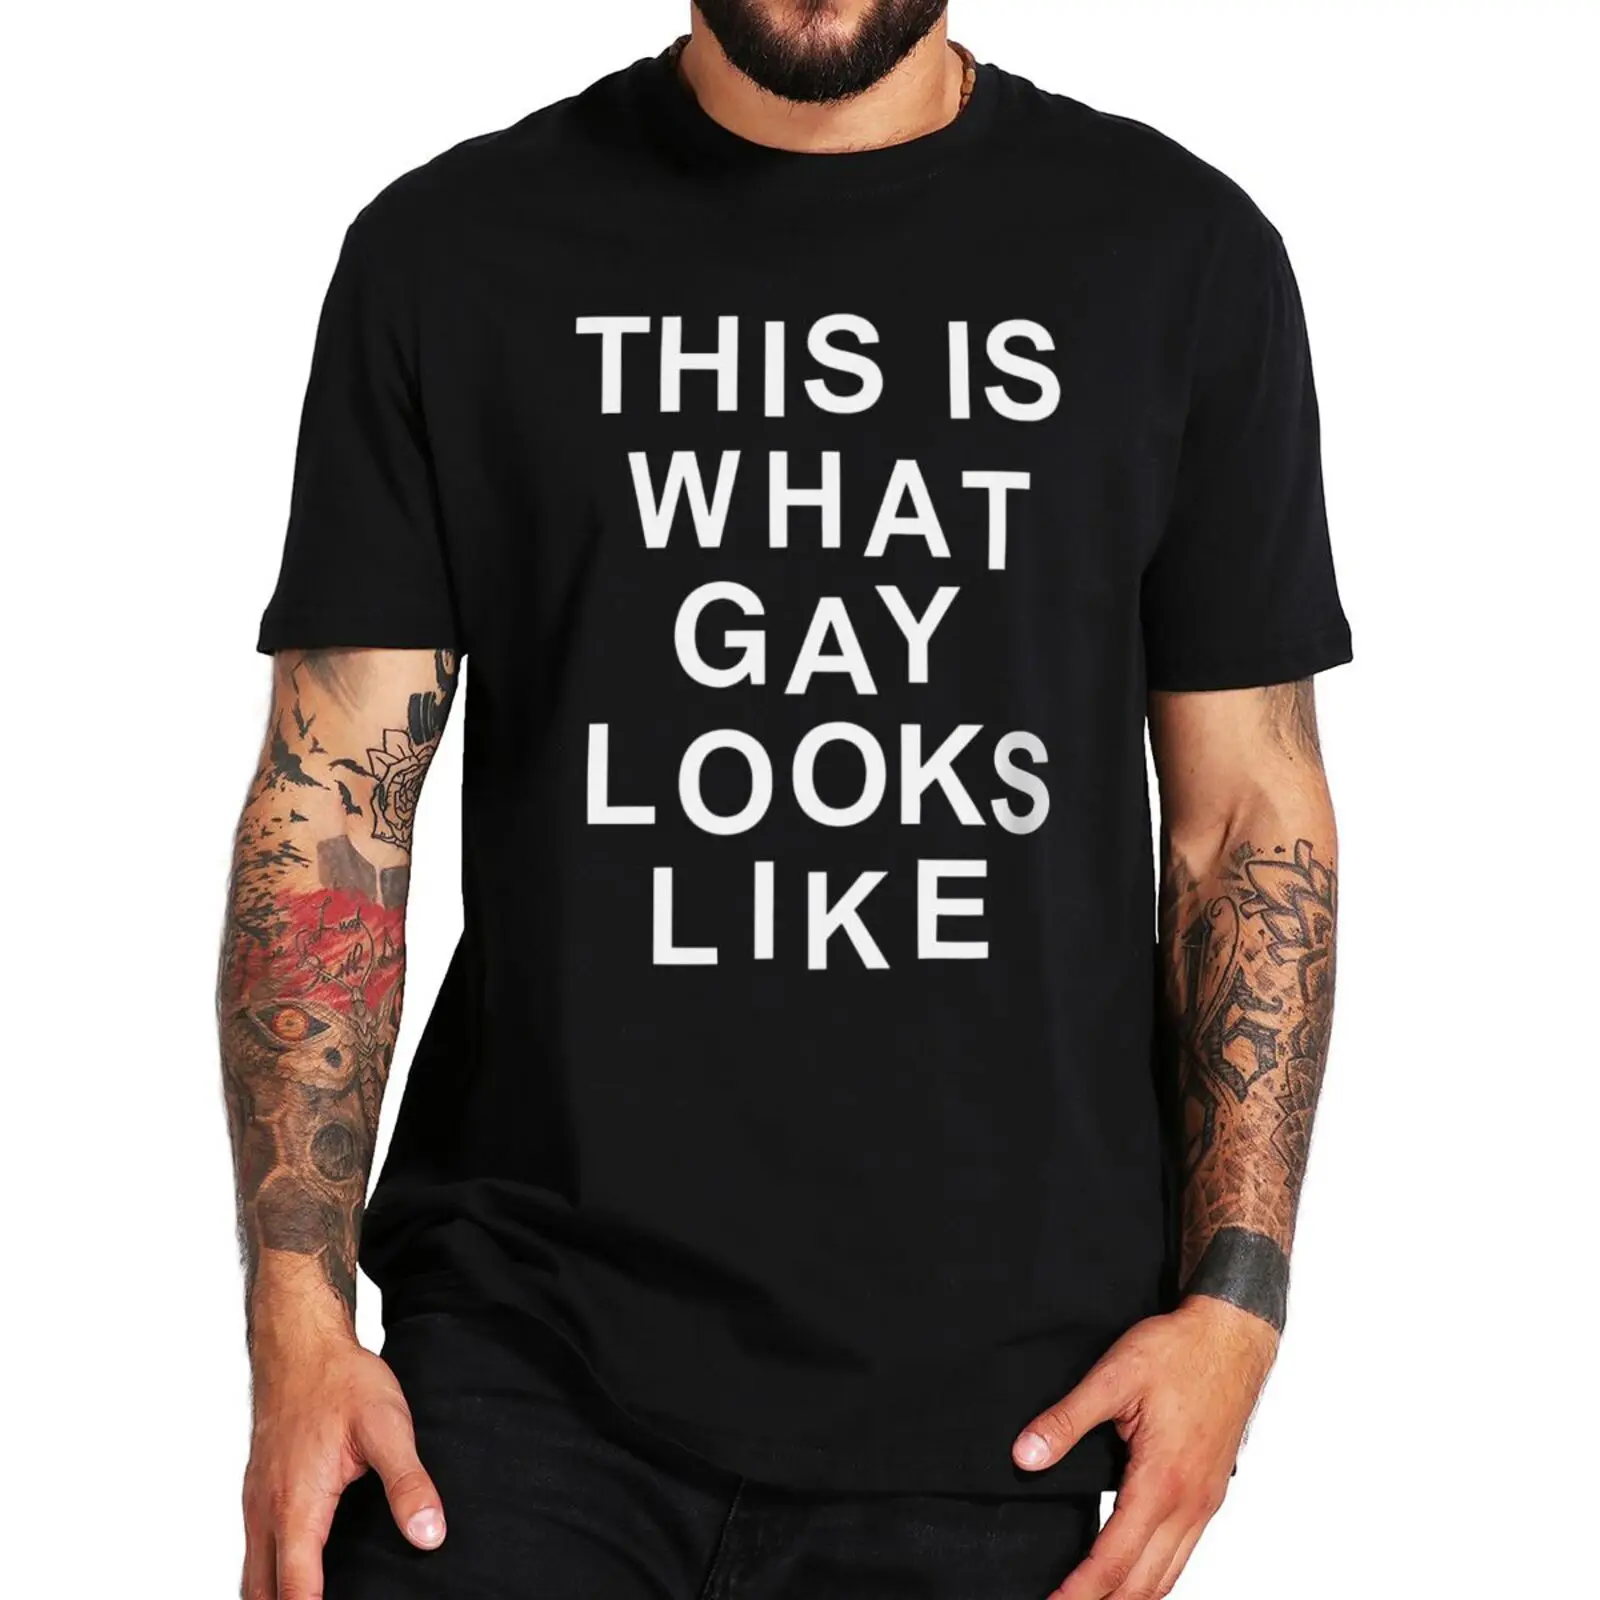 

This Is What Gay Looks Like T Shirt Humor Lgbt Pride Gift Short Sleeve O-neck Unisex 100% Cotton Soft T-shirts EU Size